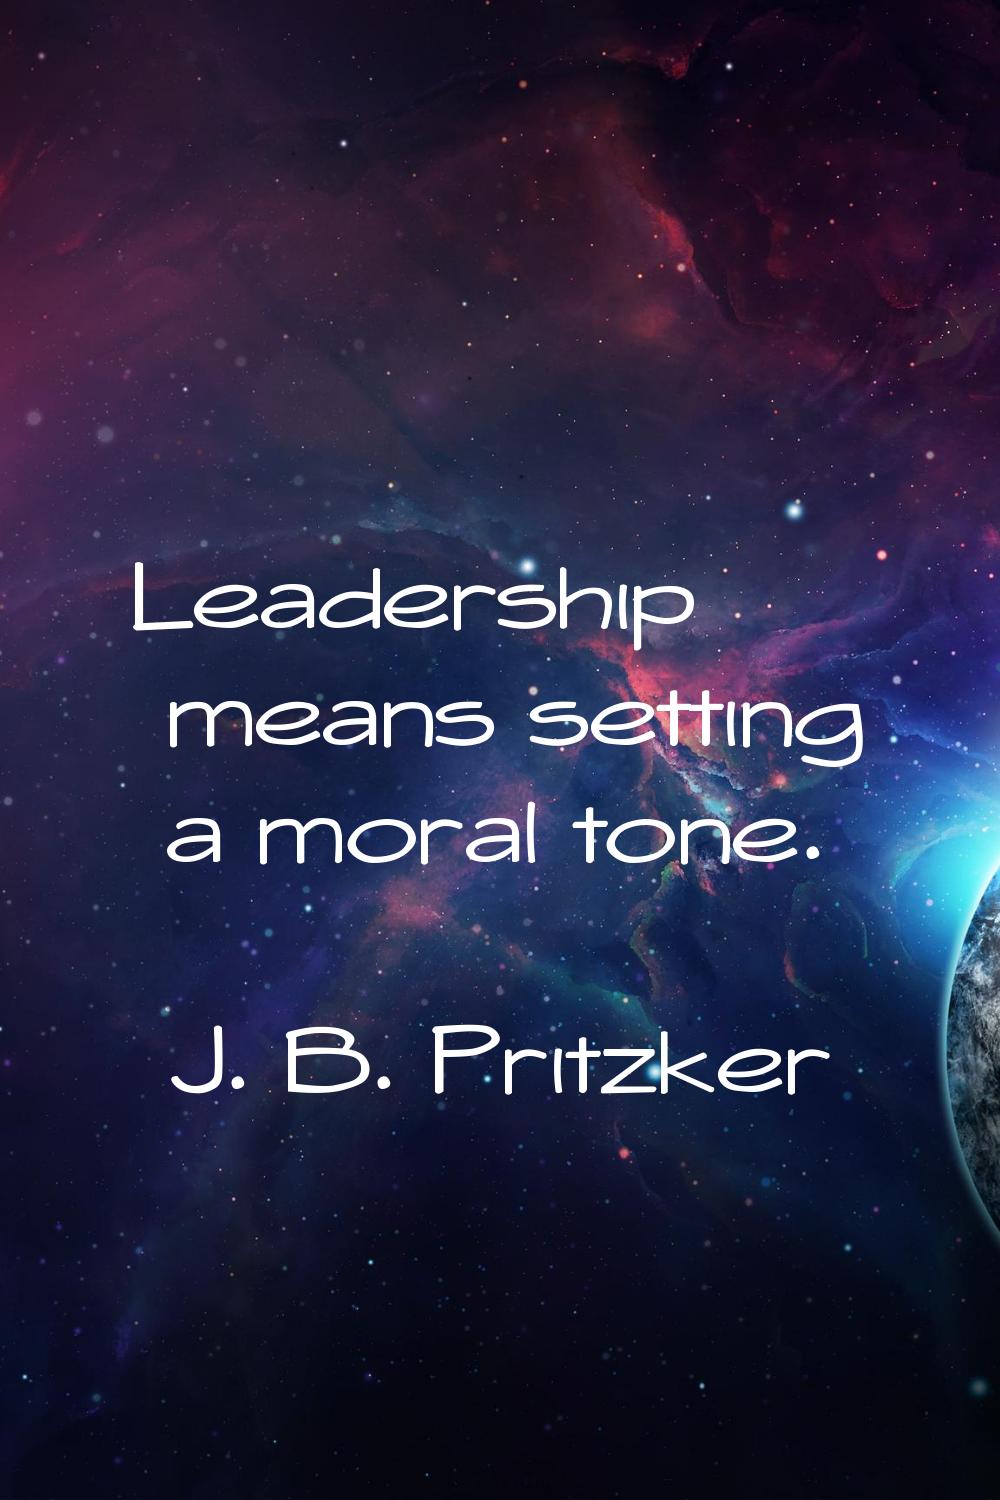 Leadership means setting a moral tone.